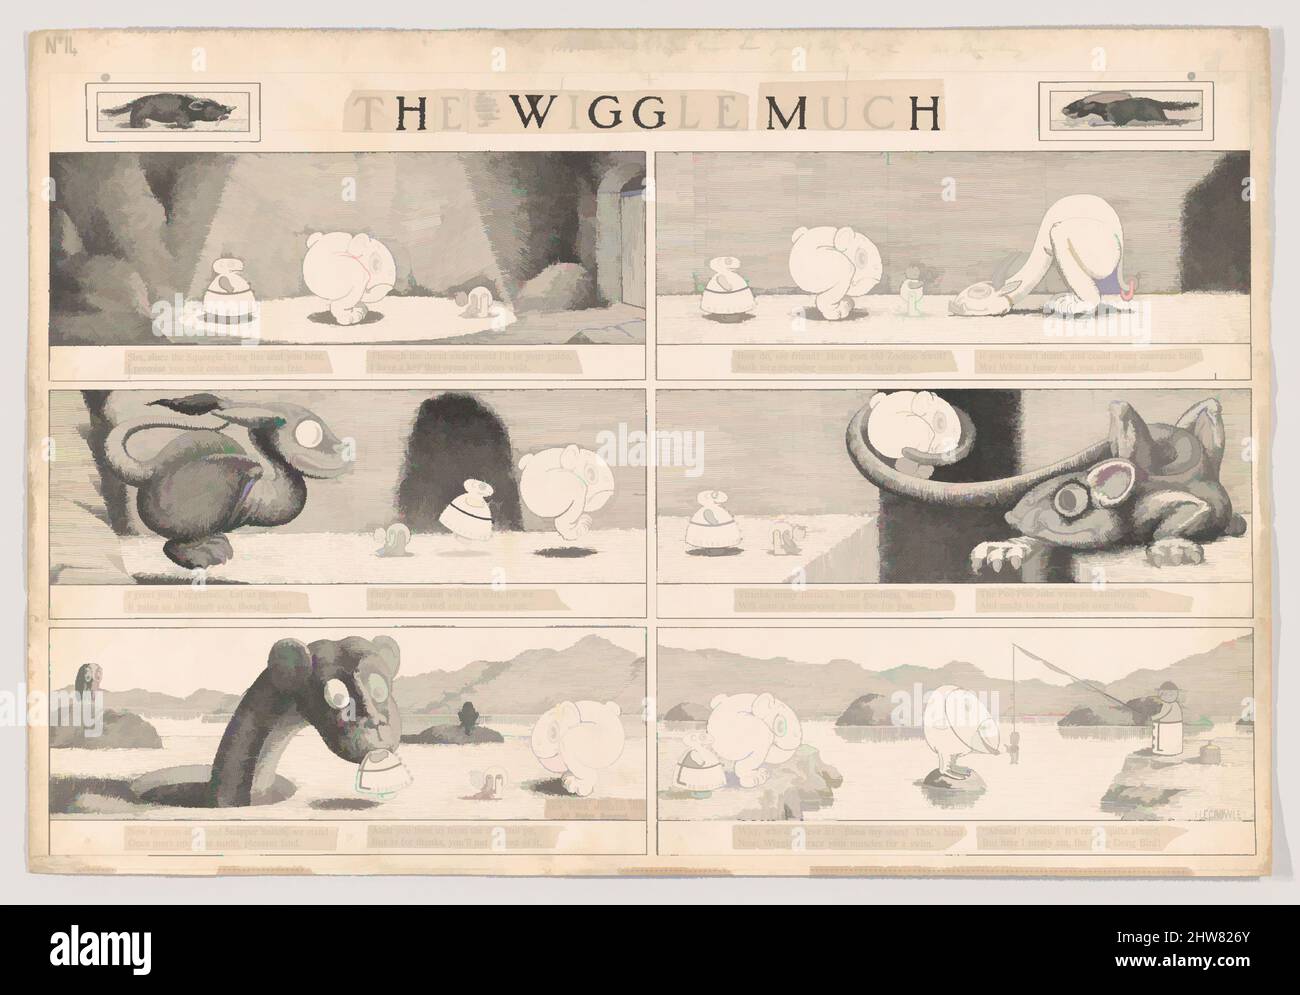 Art inspired by Dummy for 'The Wiggle Much' Comic Strip, Number 14 (published by The New York Herald, June 14, 1910), 1910, Black ink, Sheet: 14 3/4 x 21 5/8 in. (37.4 x 55 cm), Drawings, Herbert E. Crowley (British, London 1873–1939 Zurich, Classic works modernized by Artotop with a splash of modernity. Shapes, color and value, eye-catching visual impact on art. Emotions through freedom of artworks in a contemporary way. A timeless message pursuing a wildly creative new direction. Artists turning to the digital medium and creating the Artotop NFT Stock Photo